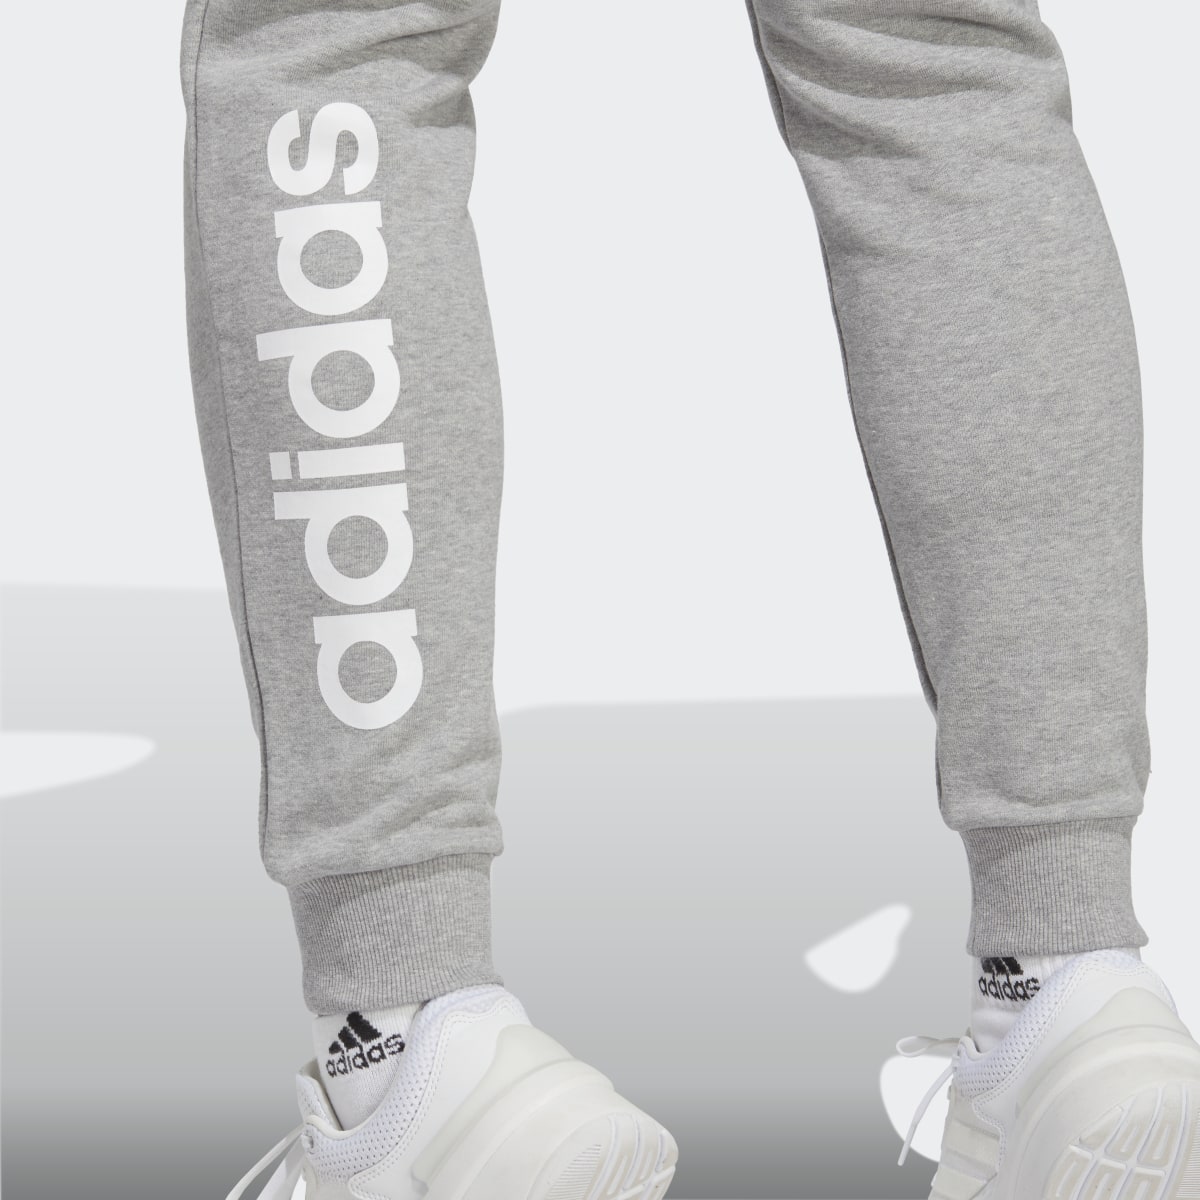 Adidas Essentials Linear French Terry Cuffed Pants. 6